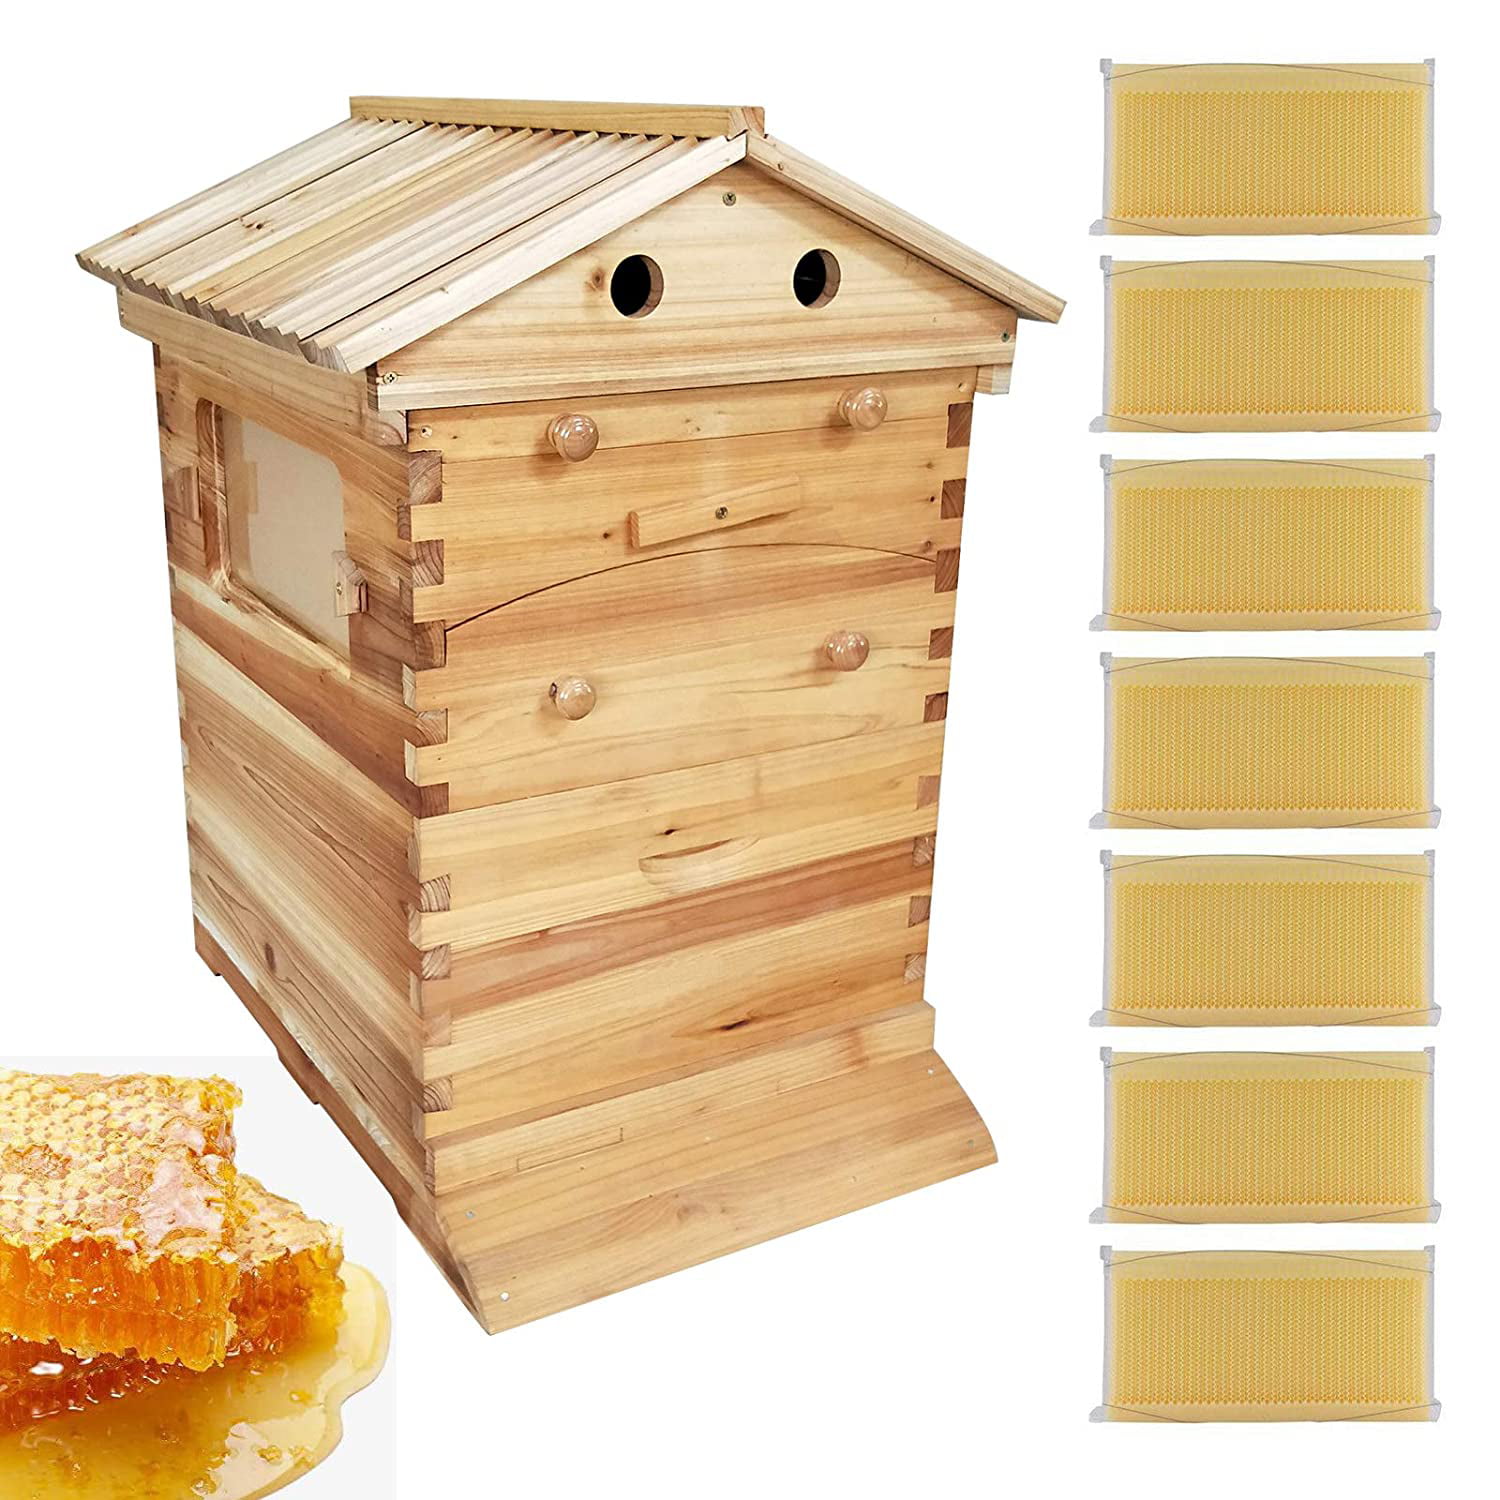 Auto Honey Beehive Bee Hive Frame Kit Details about   7Pcs Beekeeping Brood Beehive Bee House 